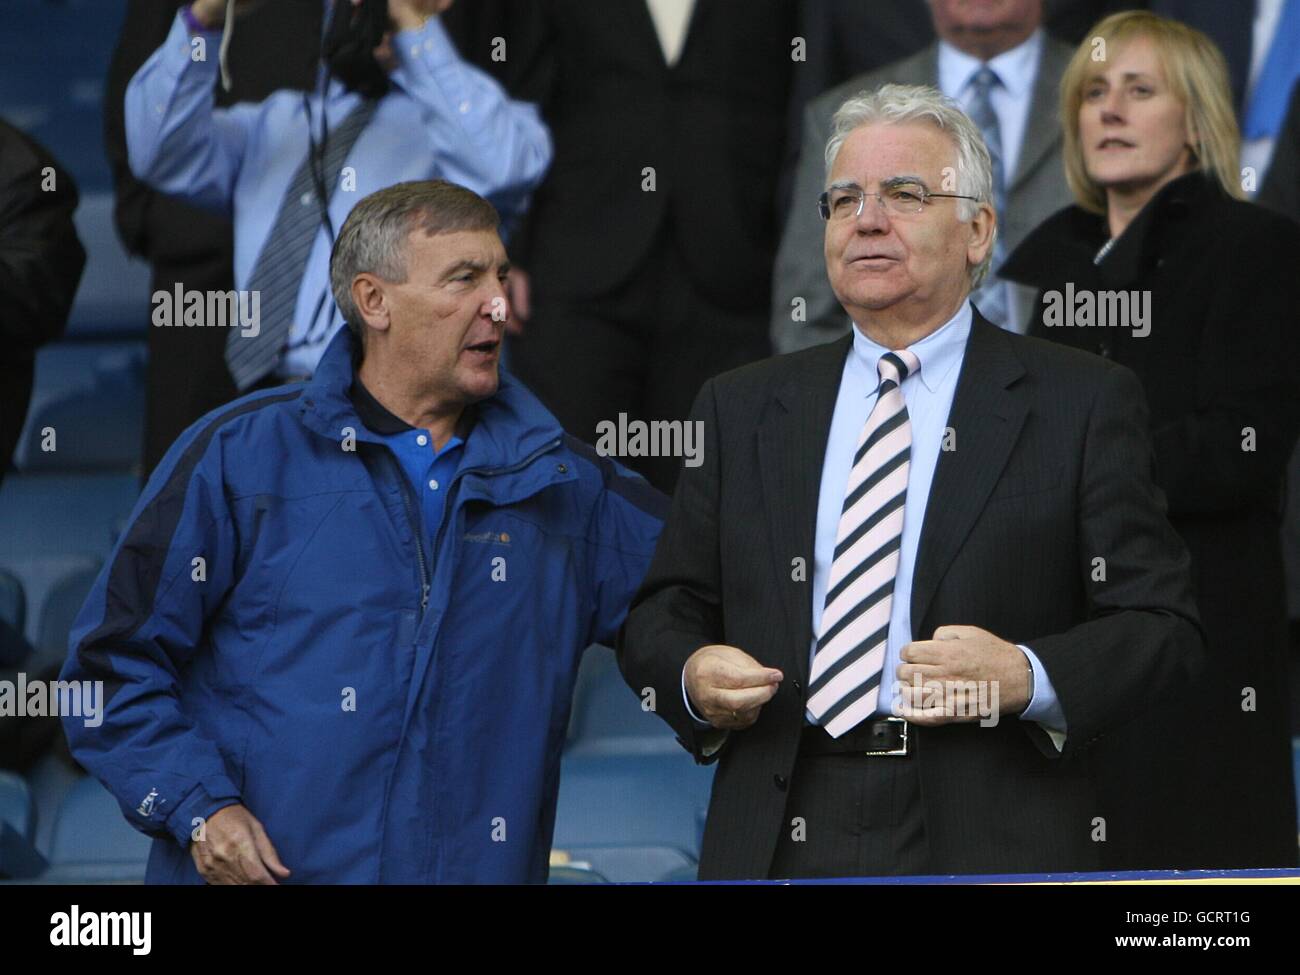 Everton chairman Bill Kenwright (right) and Unite Union Leader Tony Woodley (left) in the stands Stock Photo